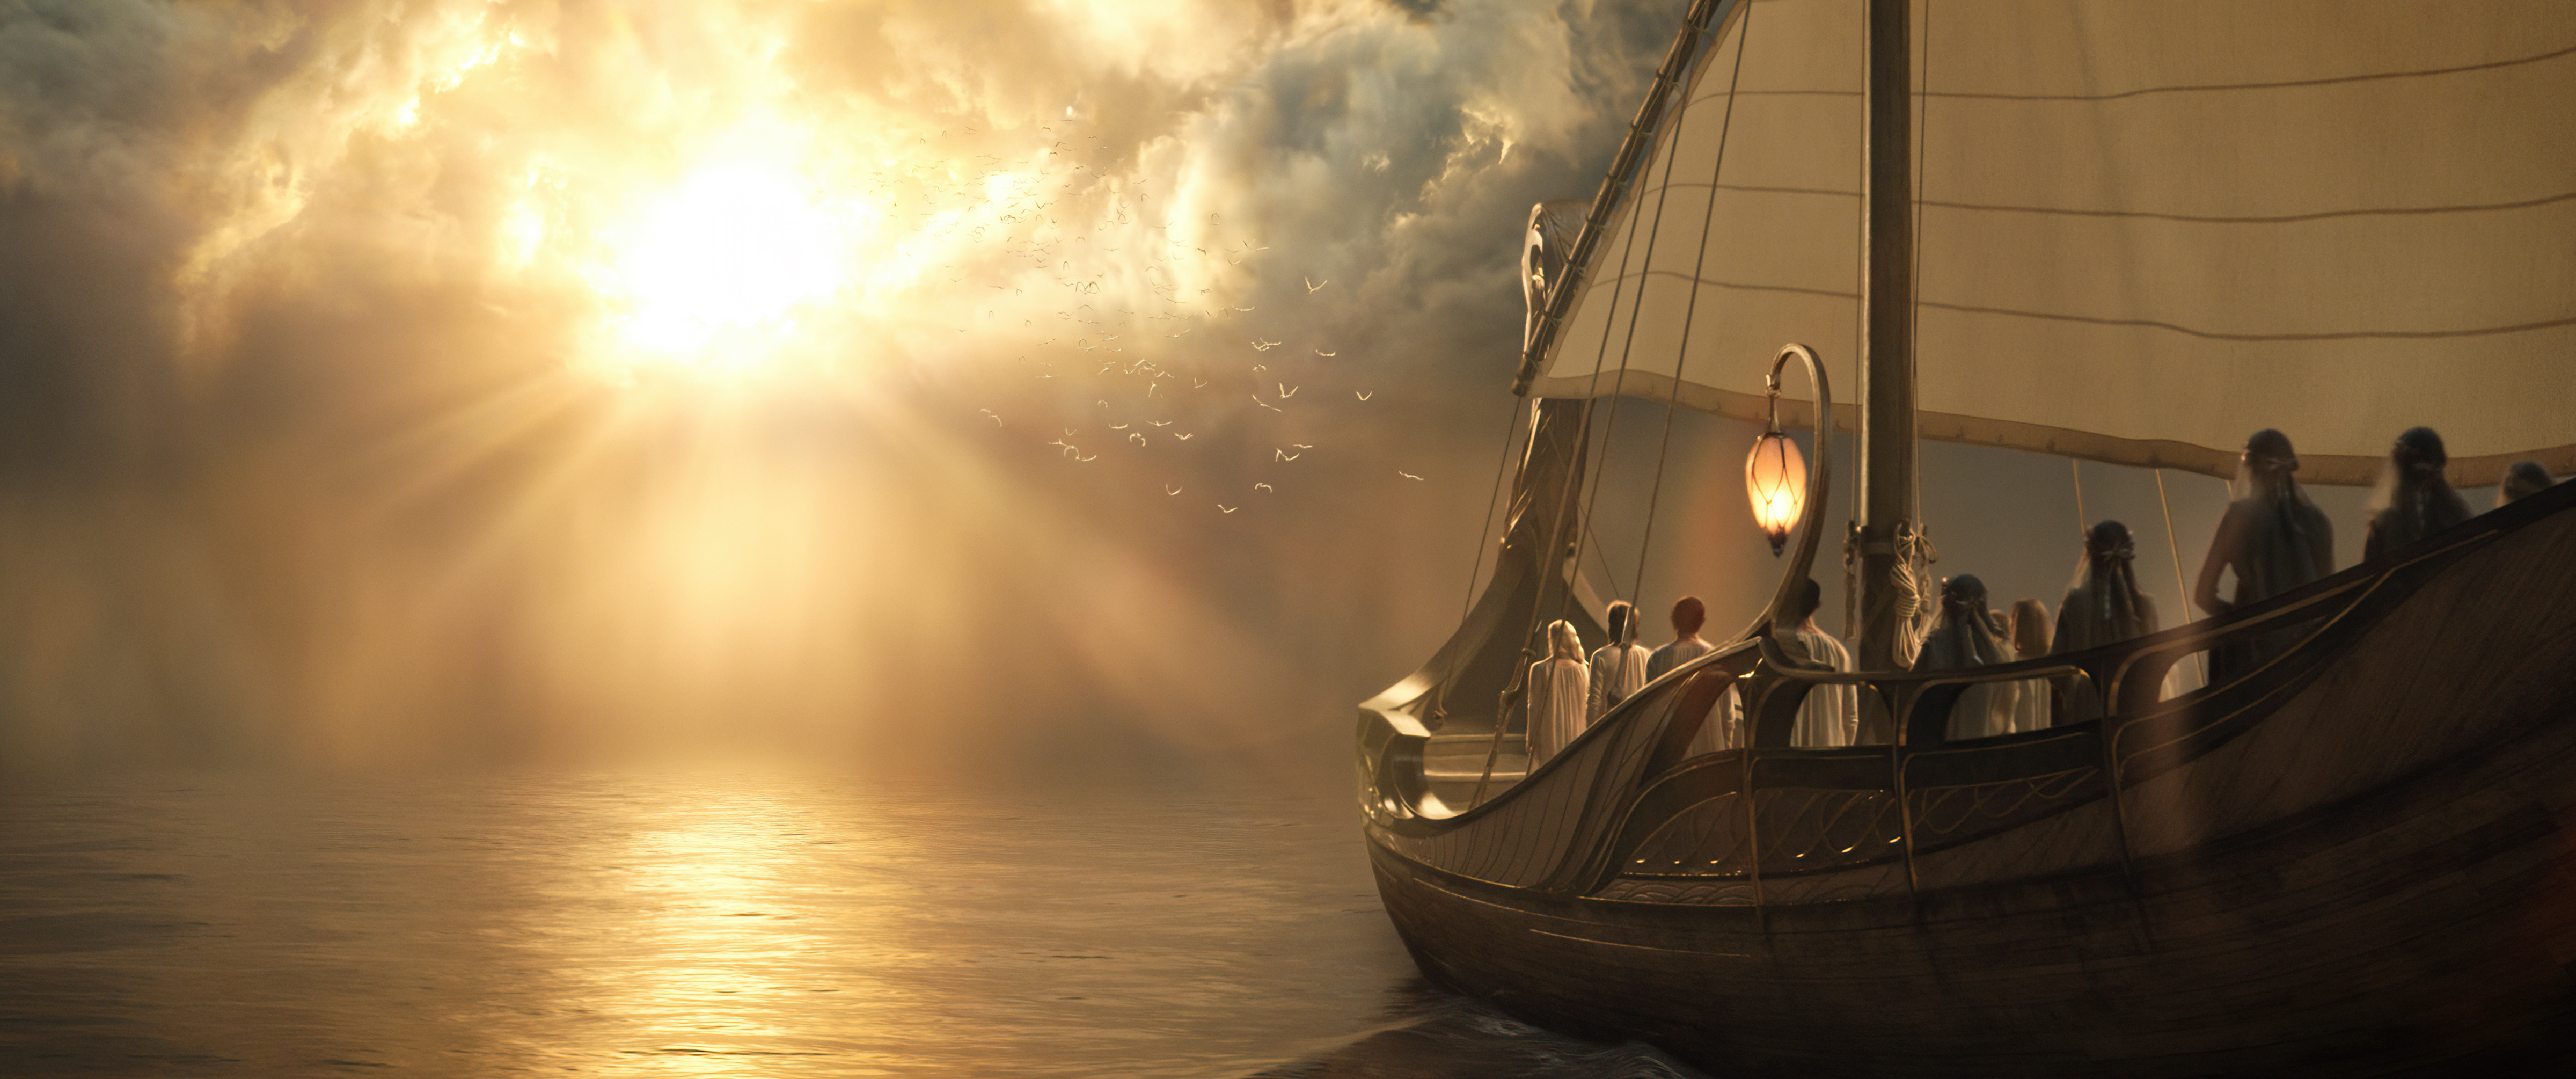 A boat headed towards a sunburst on the tranquil horizon with elves gathered on the deck watching birds fly into the sunburst in The Lord of the Rings: The Rings of Power